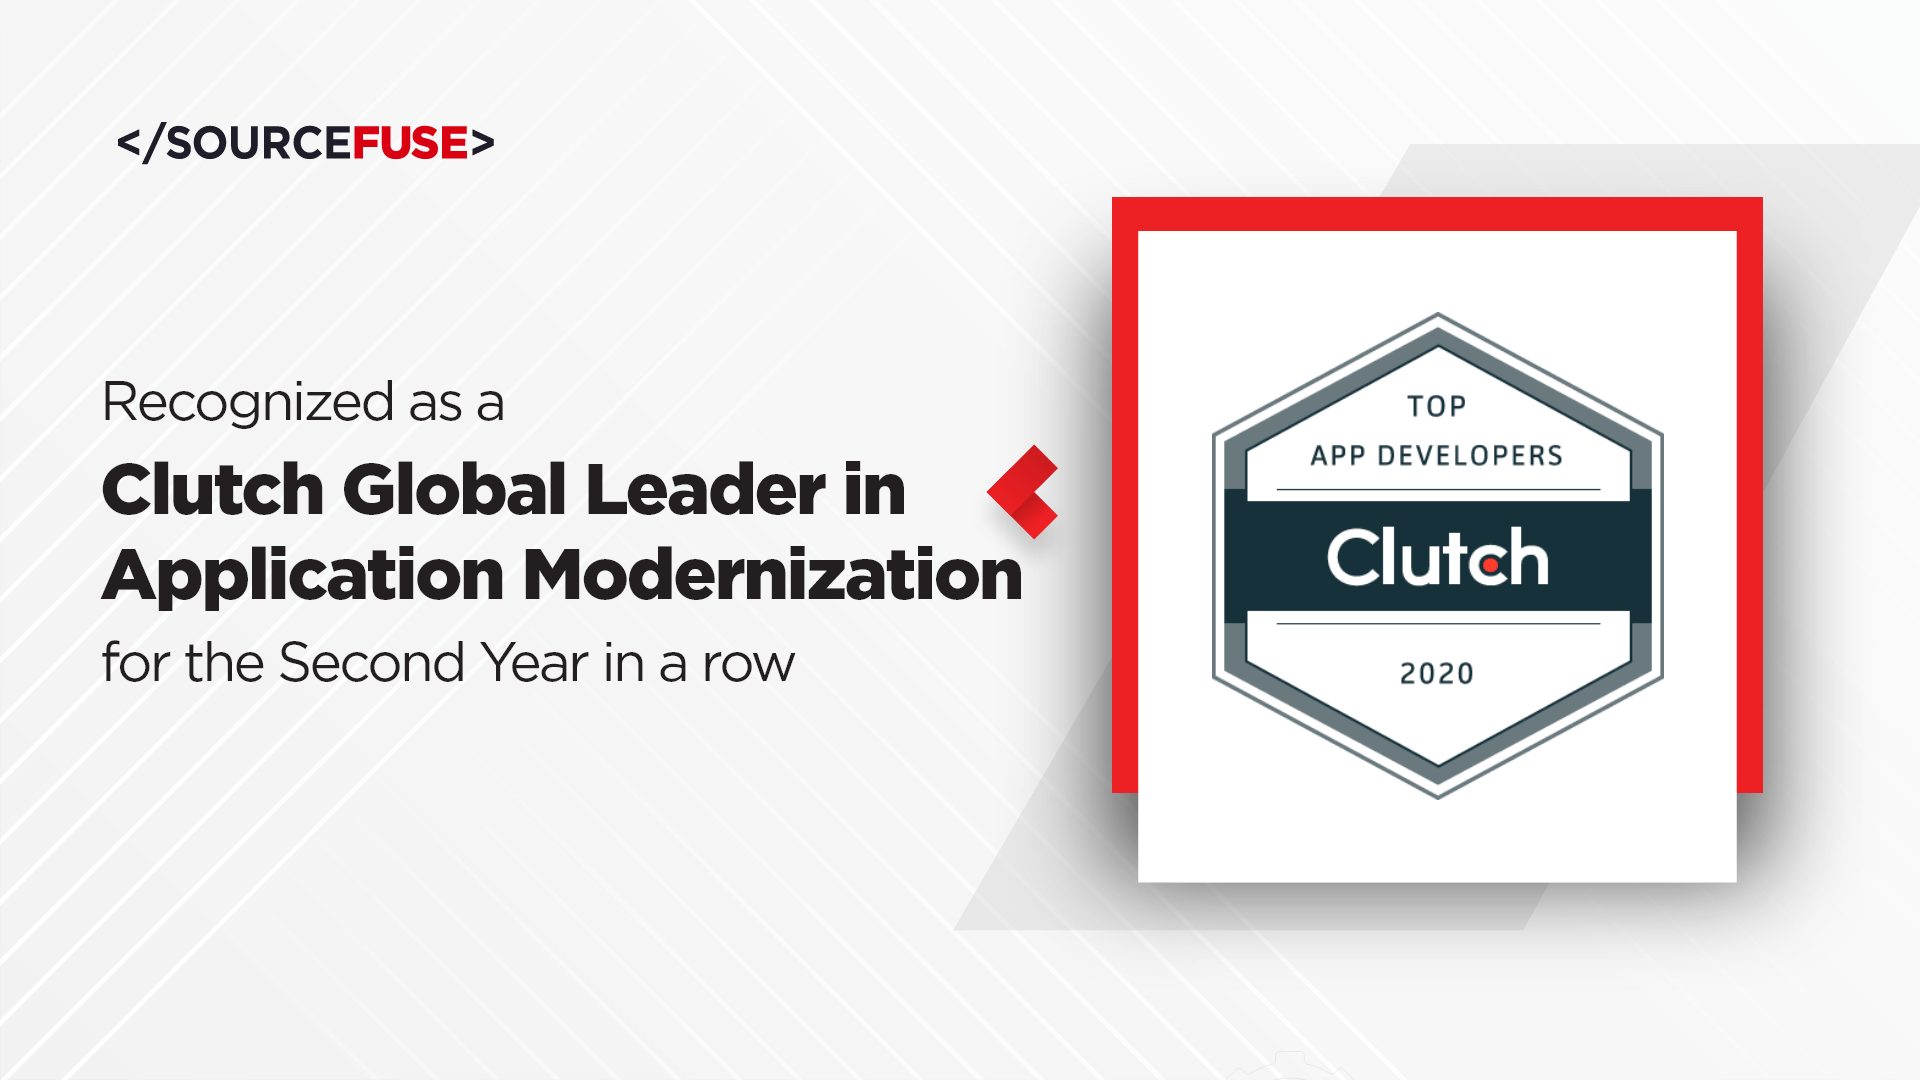 SourceFuse recognized as a Clutch Global Leader in Application Modernization For the Second Year in a row